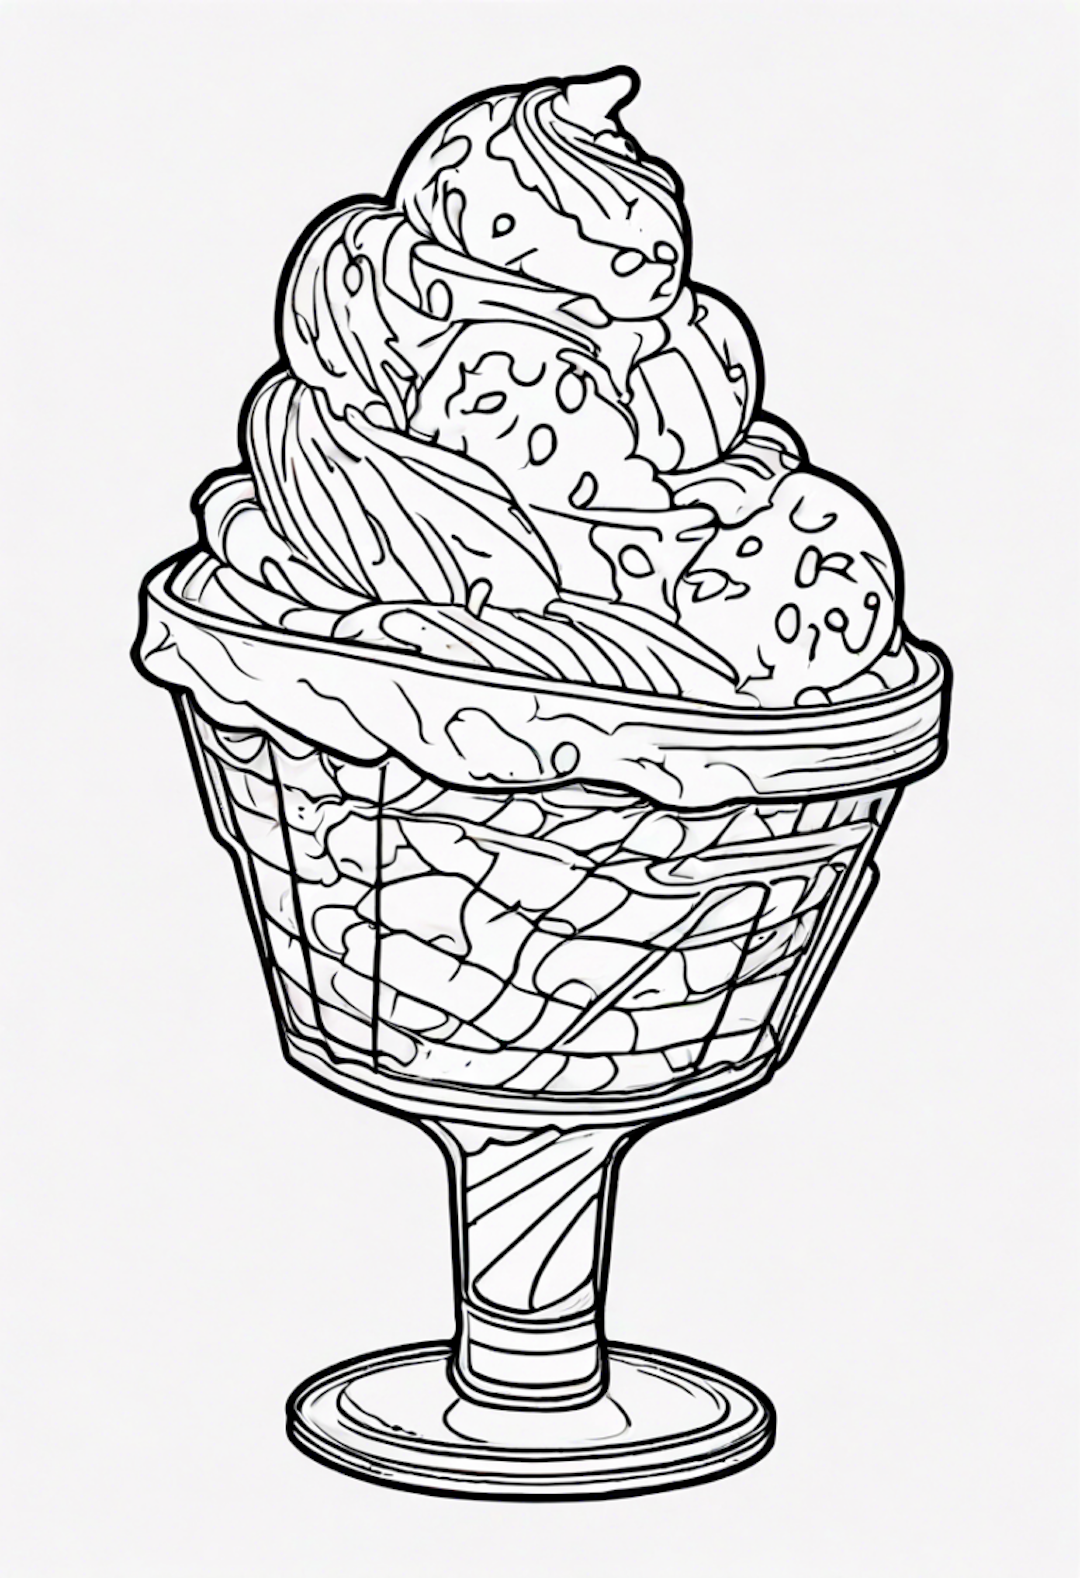 Intricate Ice Cream Parfait coloring pages